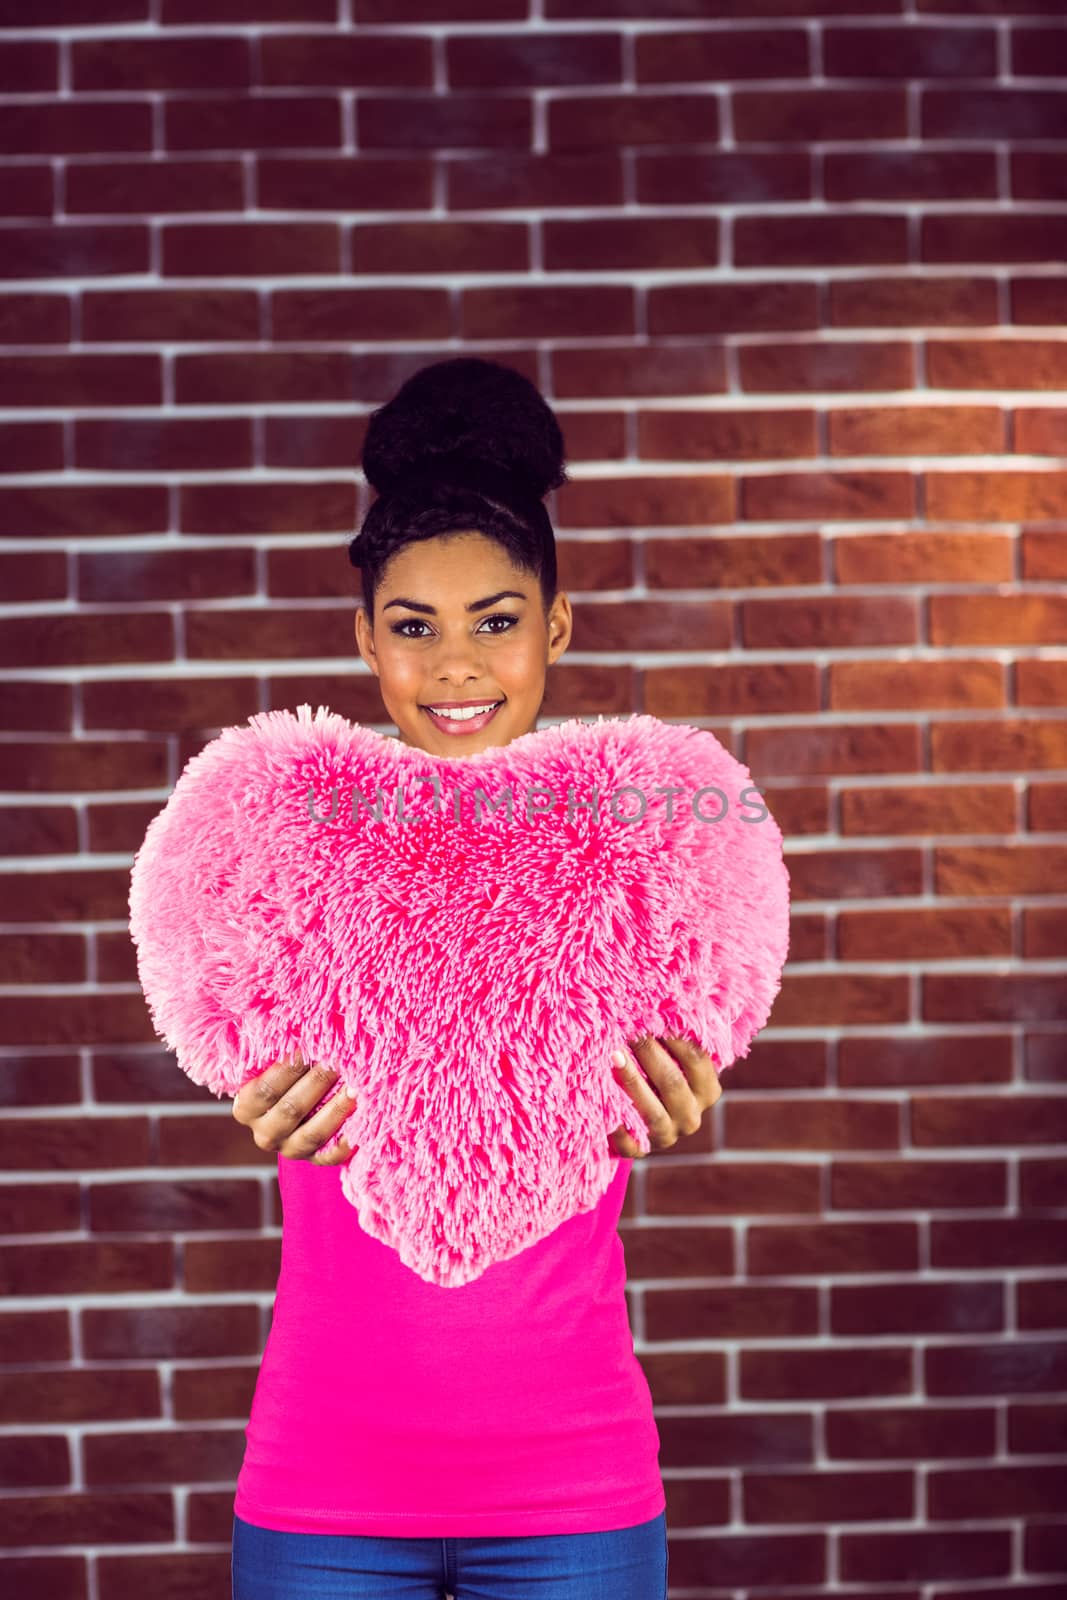 Portrait black hair model holding a pink heart shaped pillow on a red brick wall